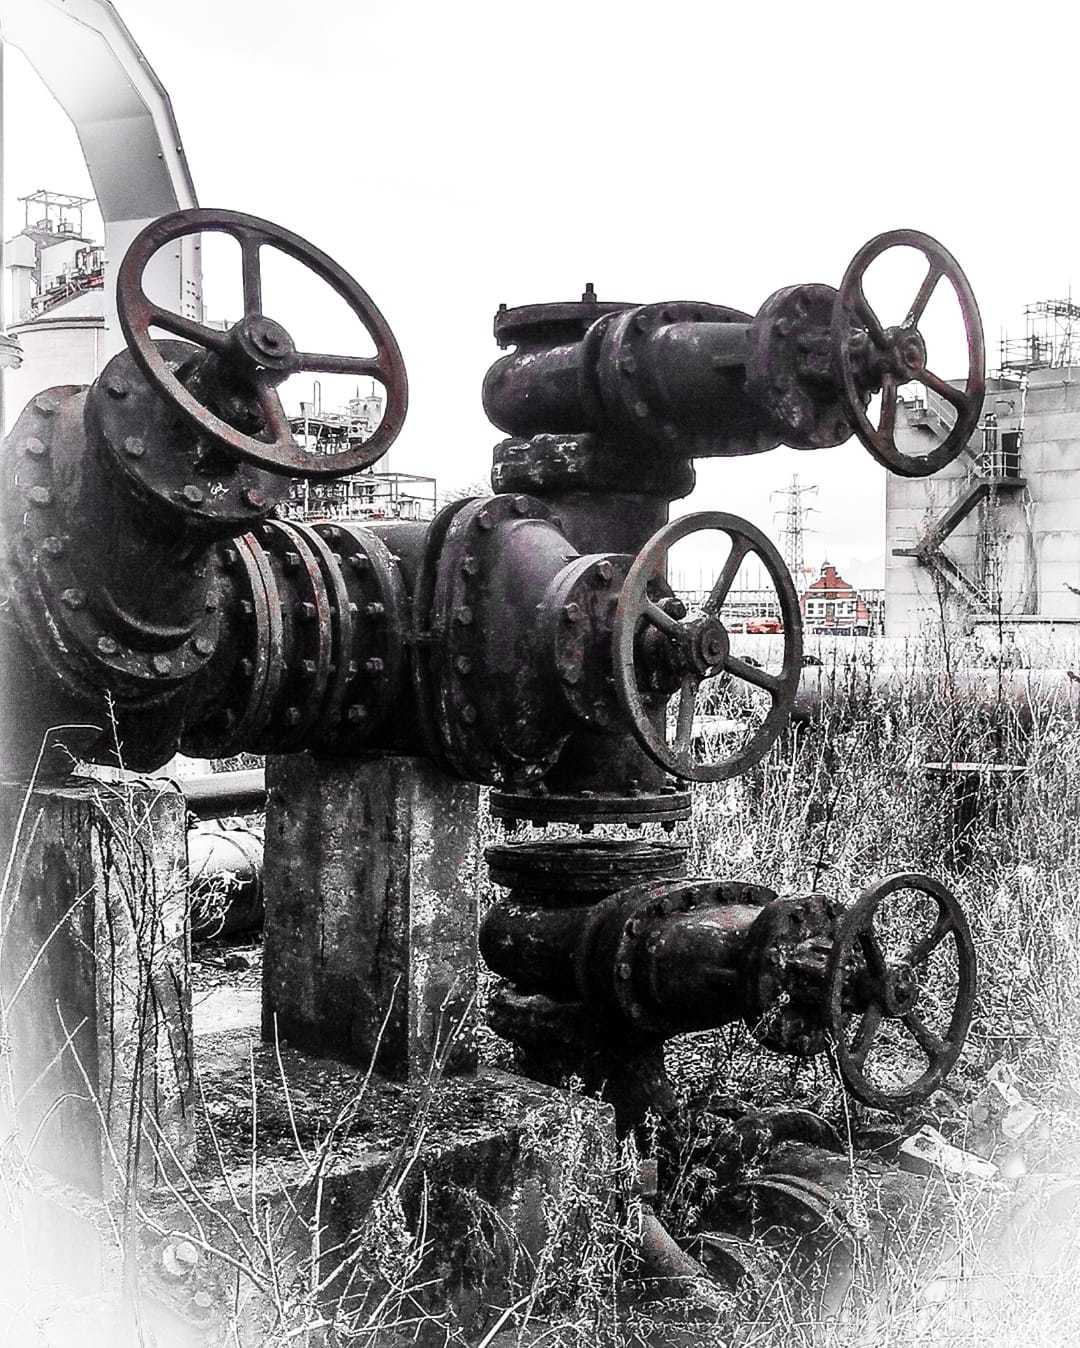 The old pumping pipes on the canal by Ann Marie Taylor